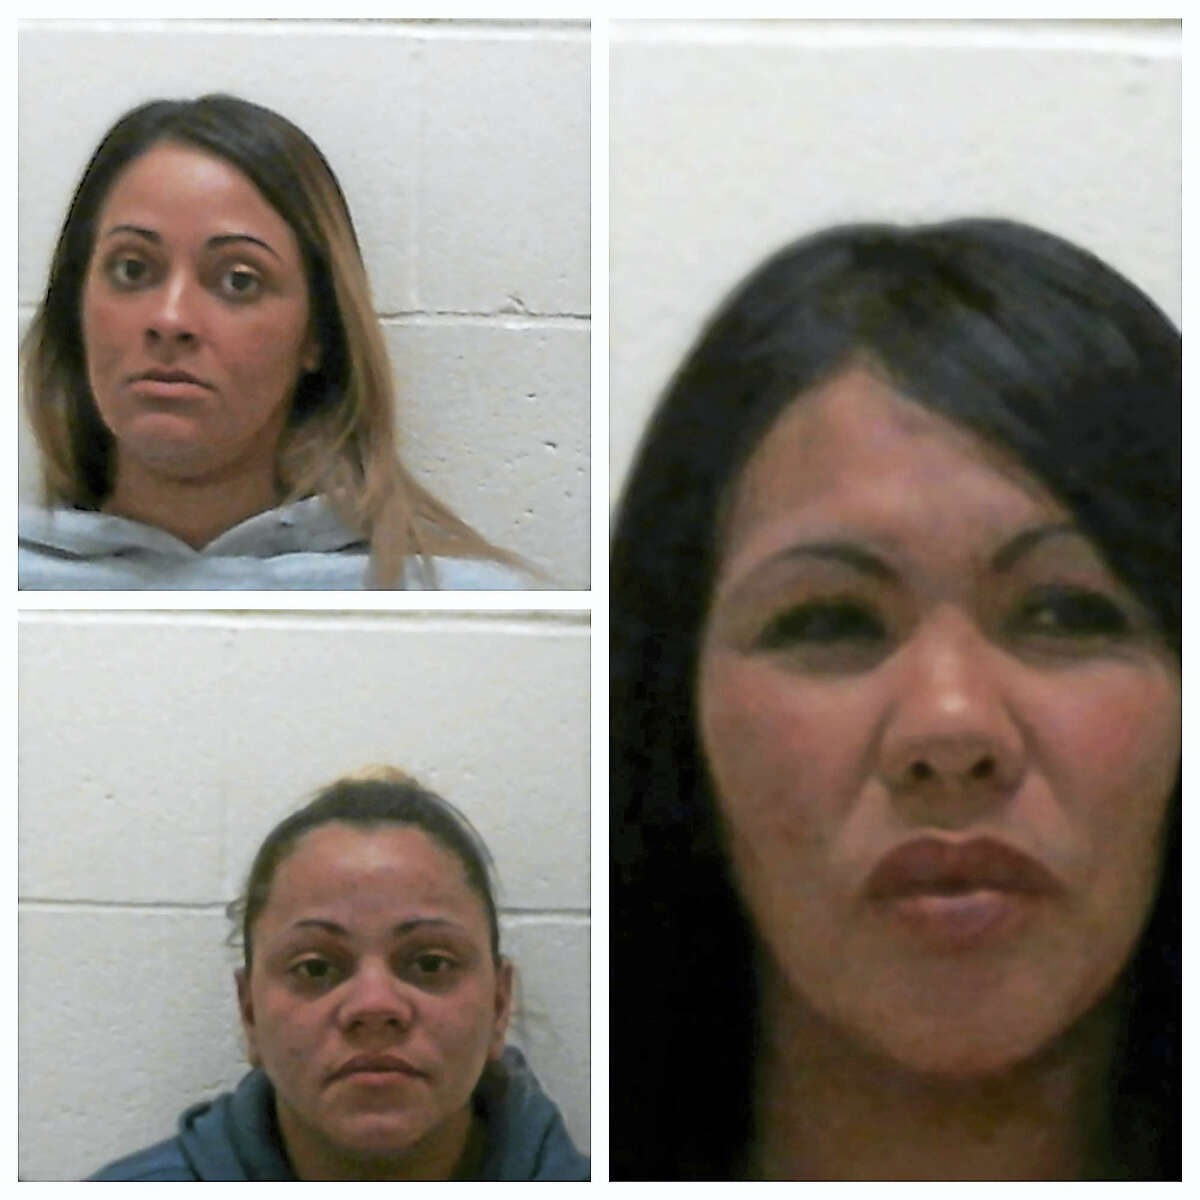 Three females from Springfield, Mass. were charged Saturday, March 4, 2017 for shoplifting nearly $10,000 worth of footwear and clothing from about 13 stores at Clinton Crossing Premium Outlets. Betzaida Rodriguez (top left), Sheyla Orengo (bottom left) and Delia Rodriguez-Perez (right) were charged with second-degree larceny and conspiracy to commit larceny. (Photo courtesy of Clinton Police Department)